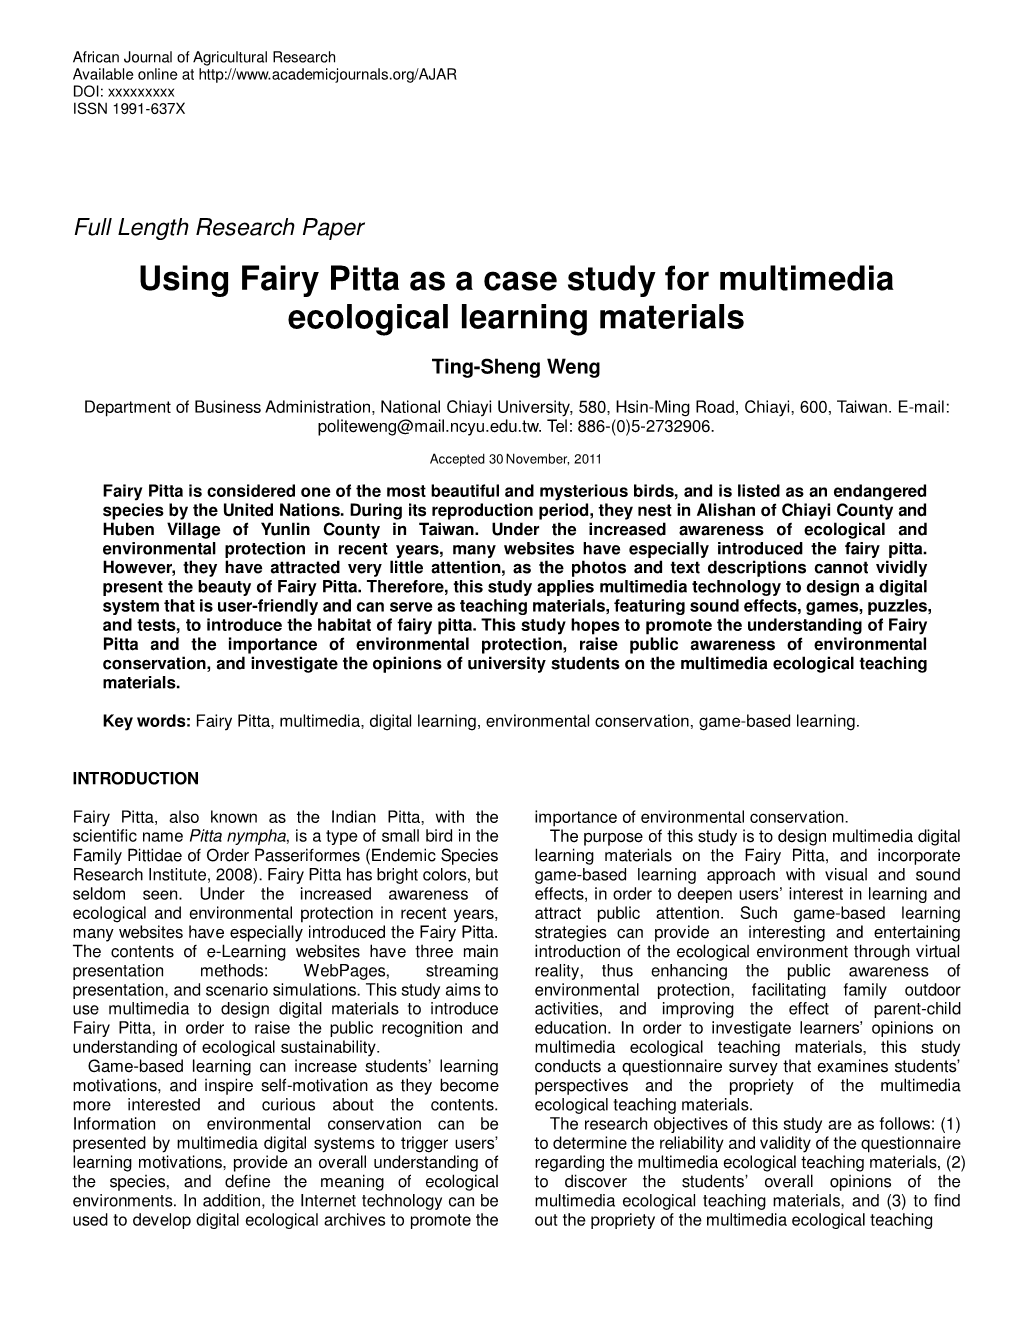 Using Fairy Pitta As a Case Study for Multimedia Ecological Learning Materials